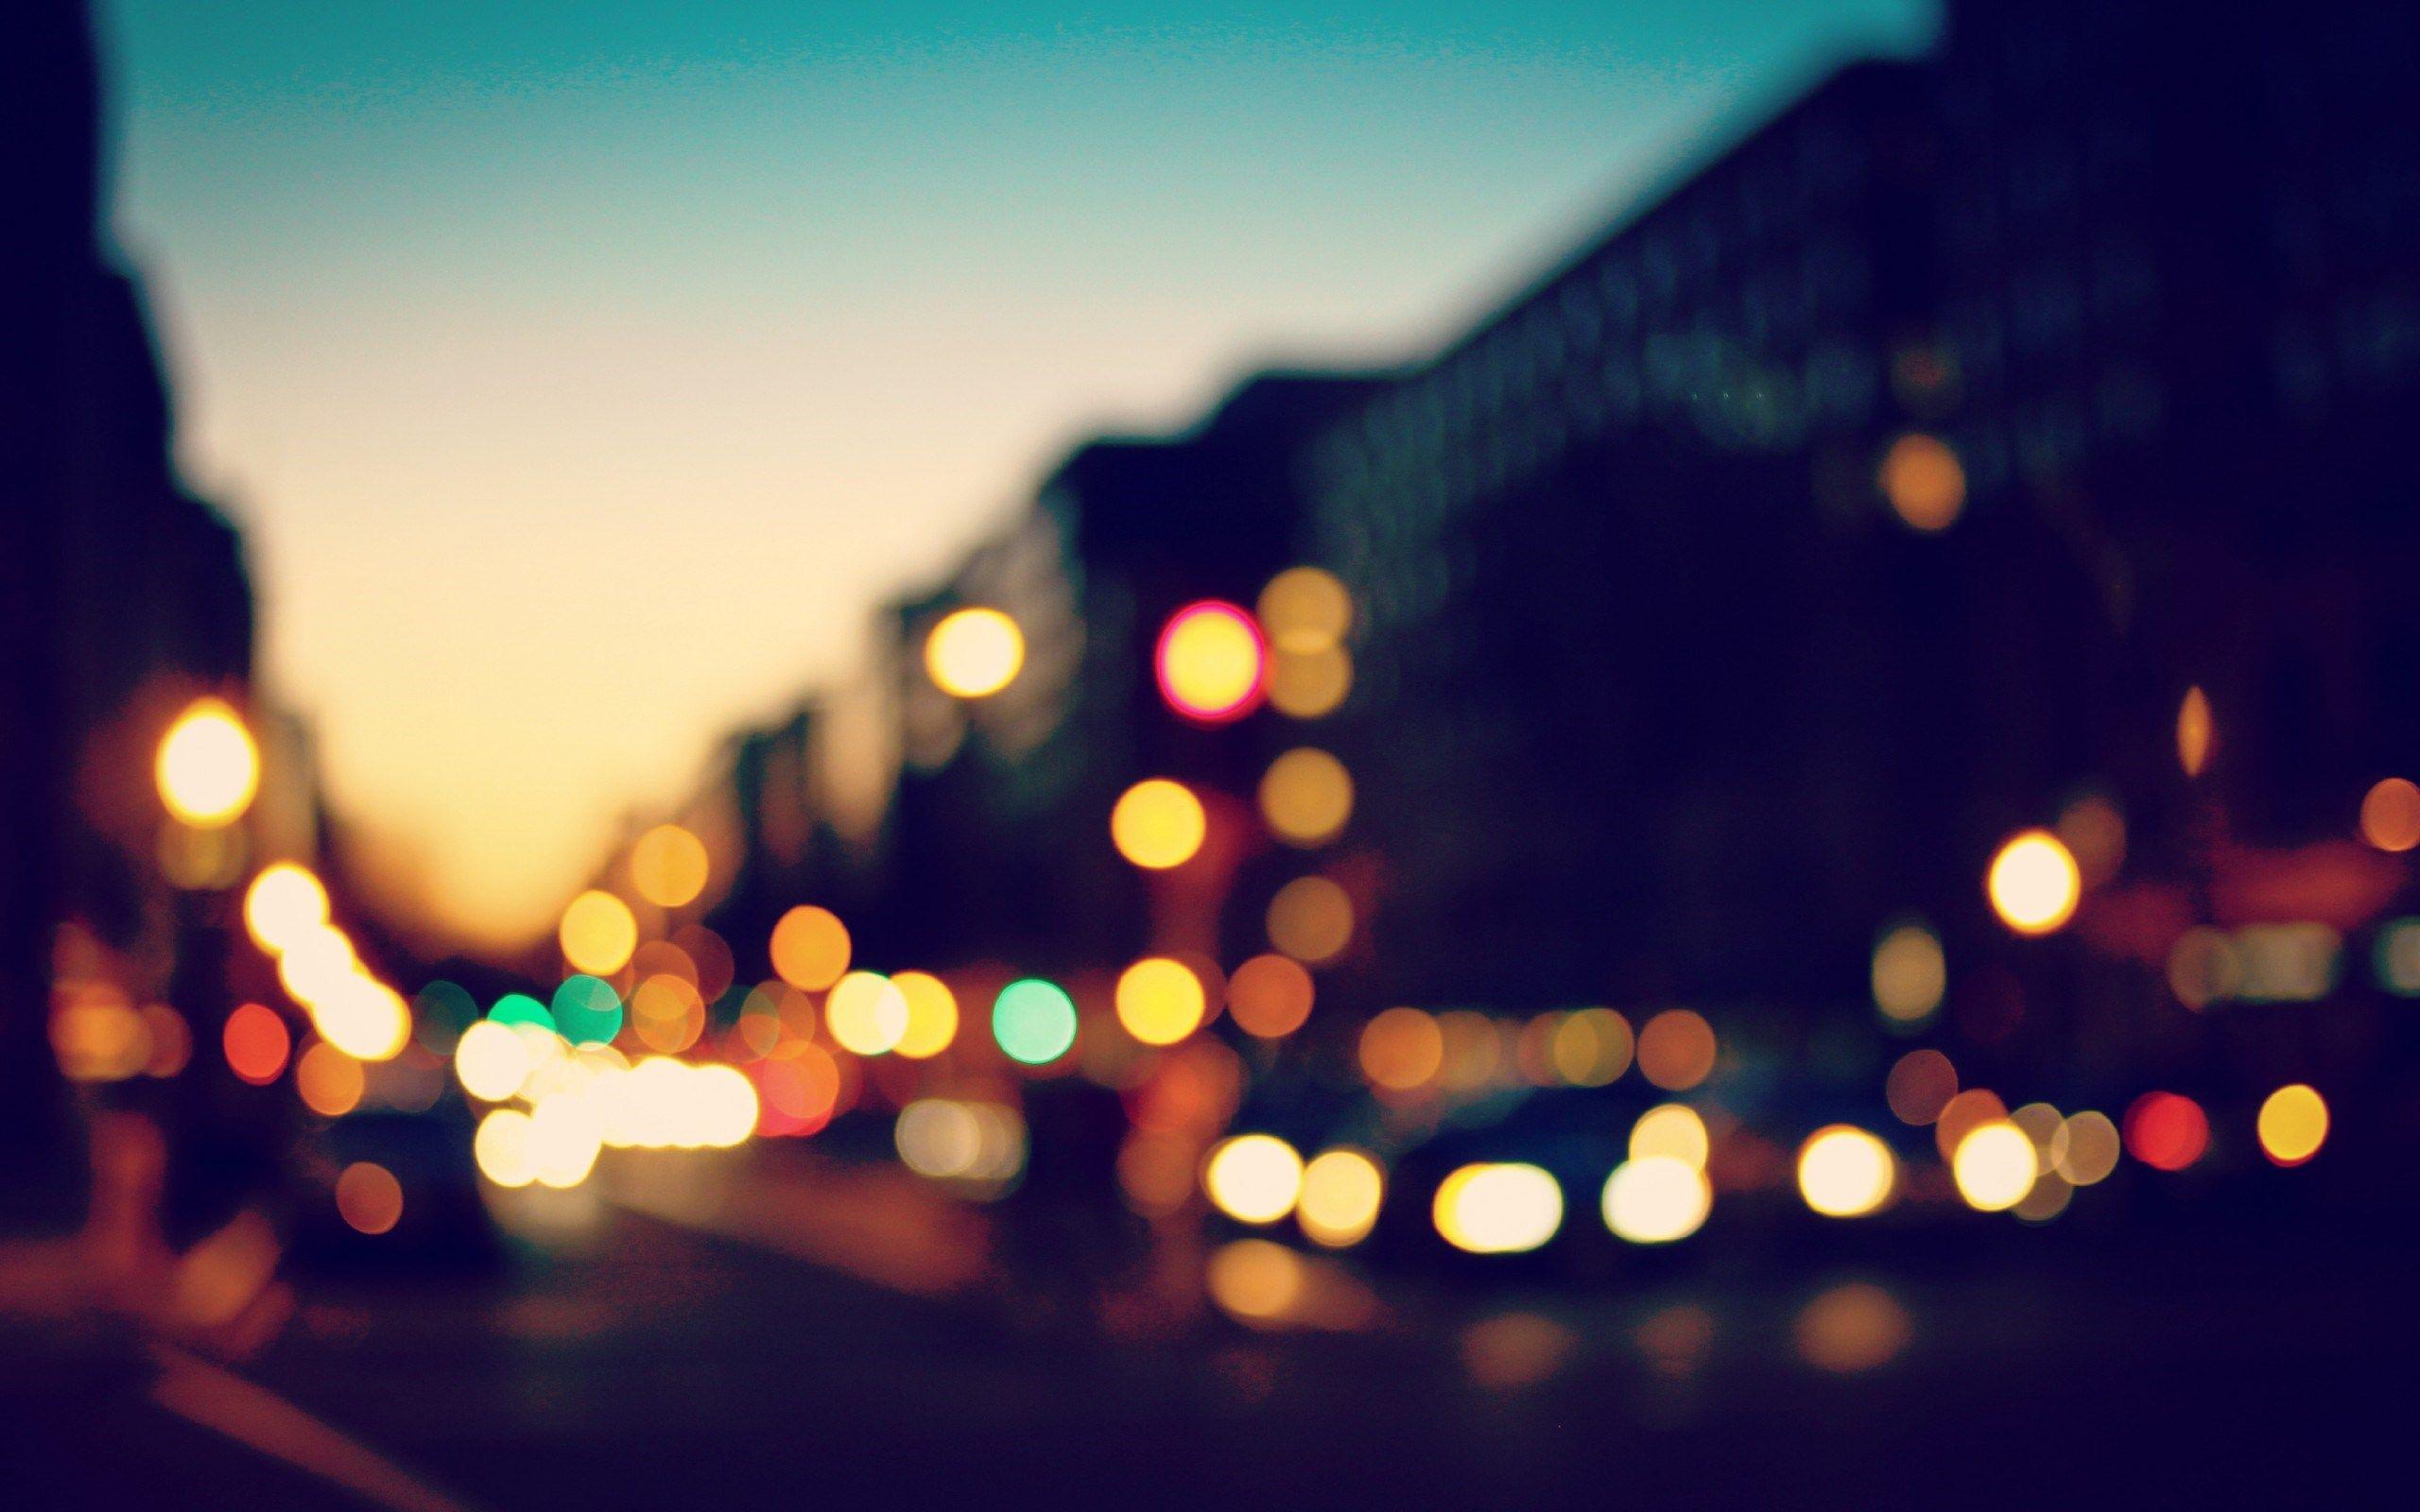 Blurred City Lights Wallpaper HD Background For Computer